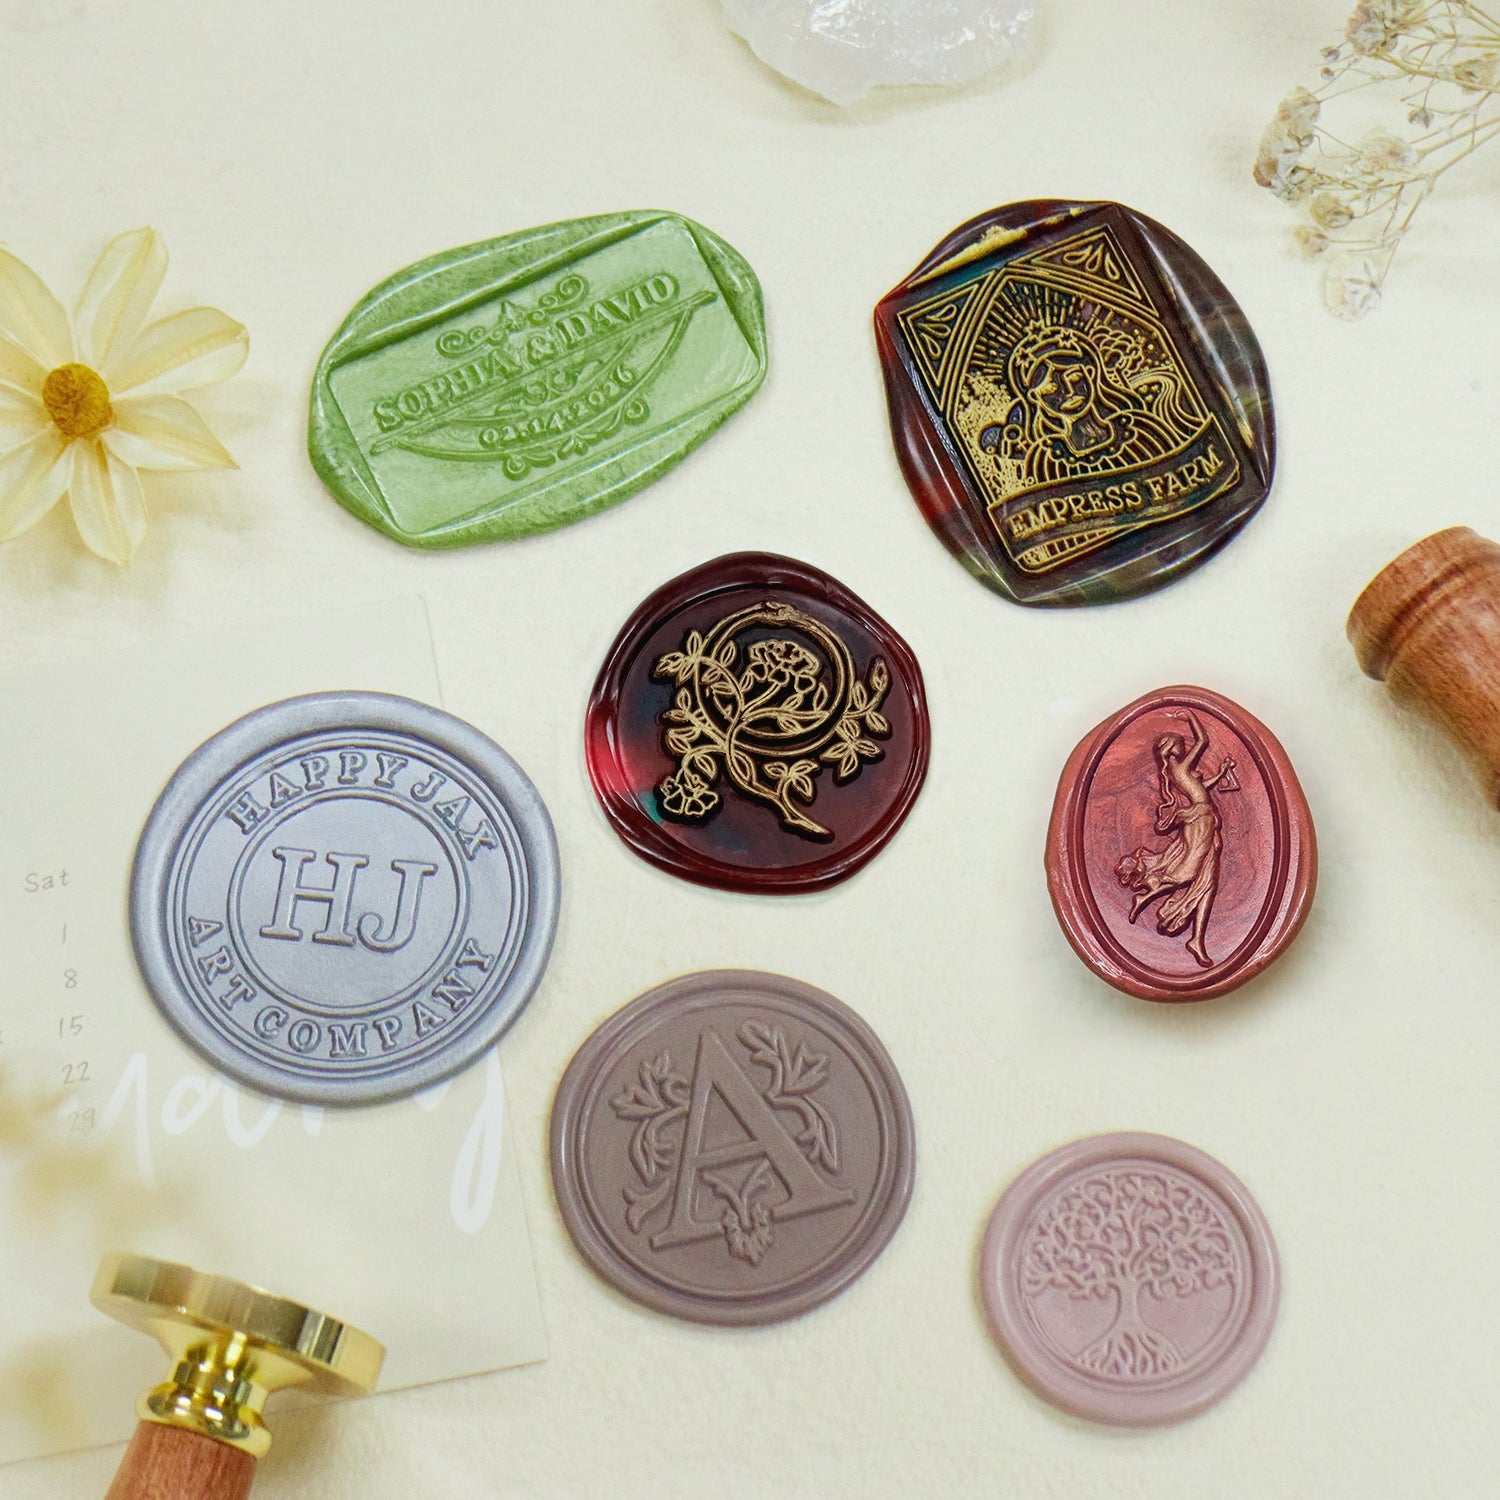 Custom Made Wax Seal Stamp - Artistic Handmade Fully Customized Wax Seal Stamp Premium Kit - with Your Own Artwork